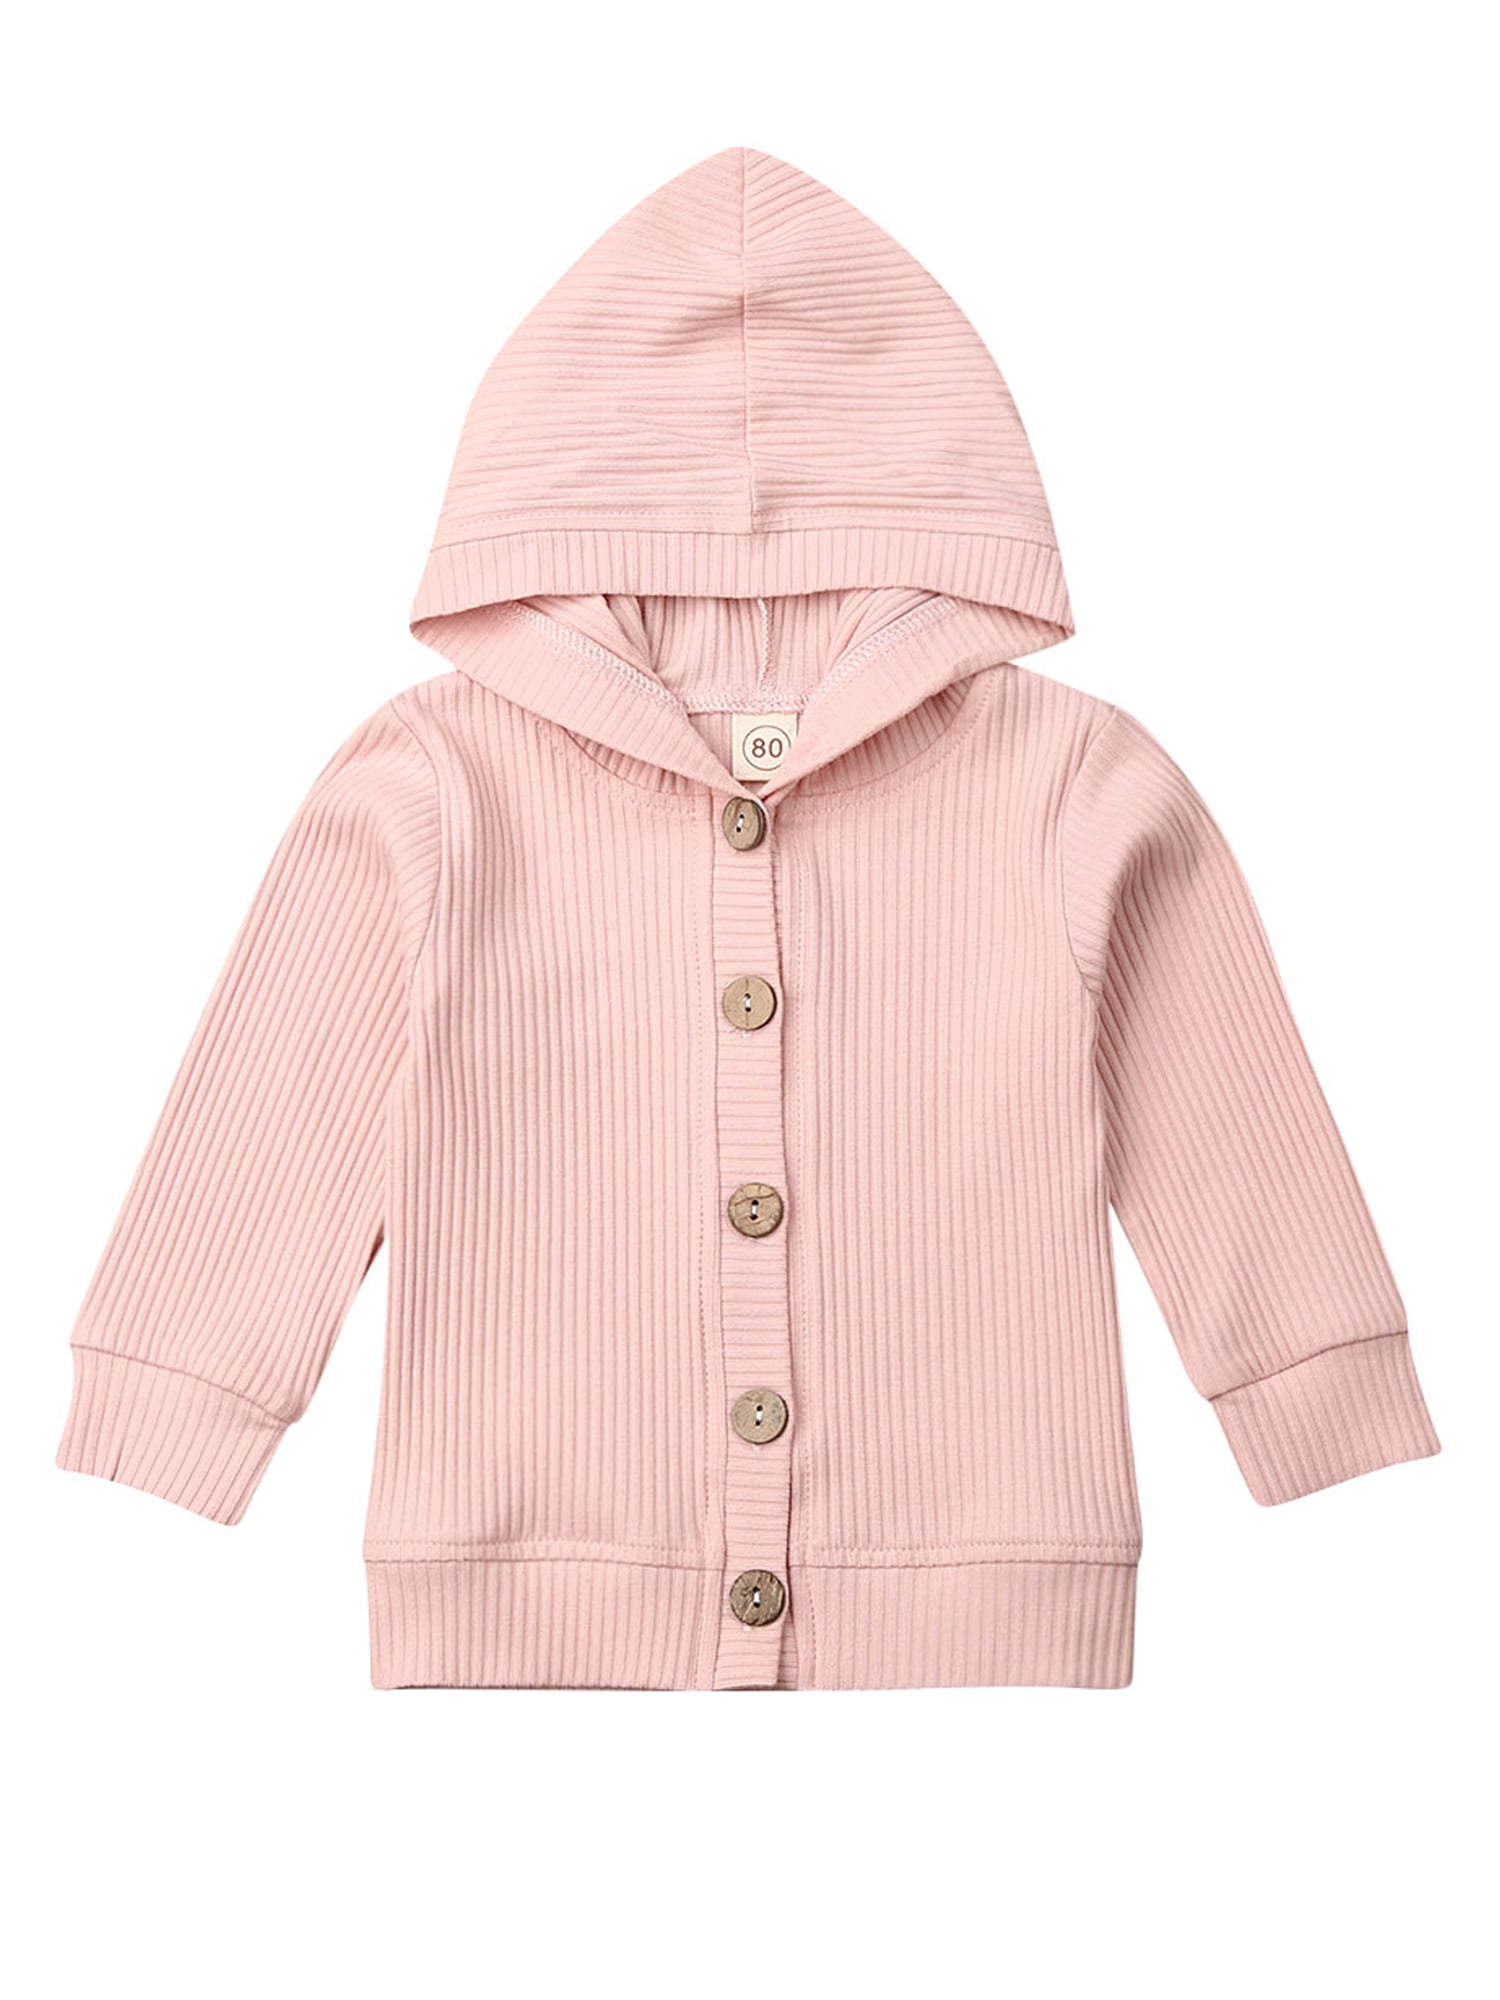 Newborn Infant Baby Girl Cotton Outerwear Hooded Coat Jacket Kids Fall Clothes 